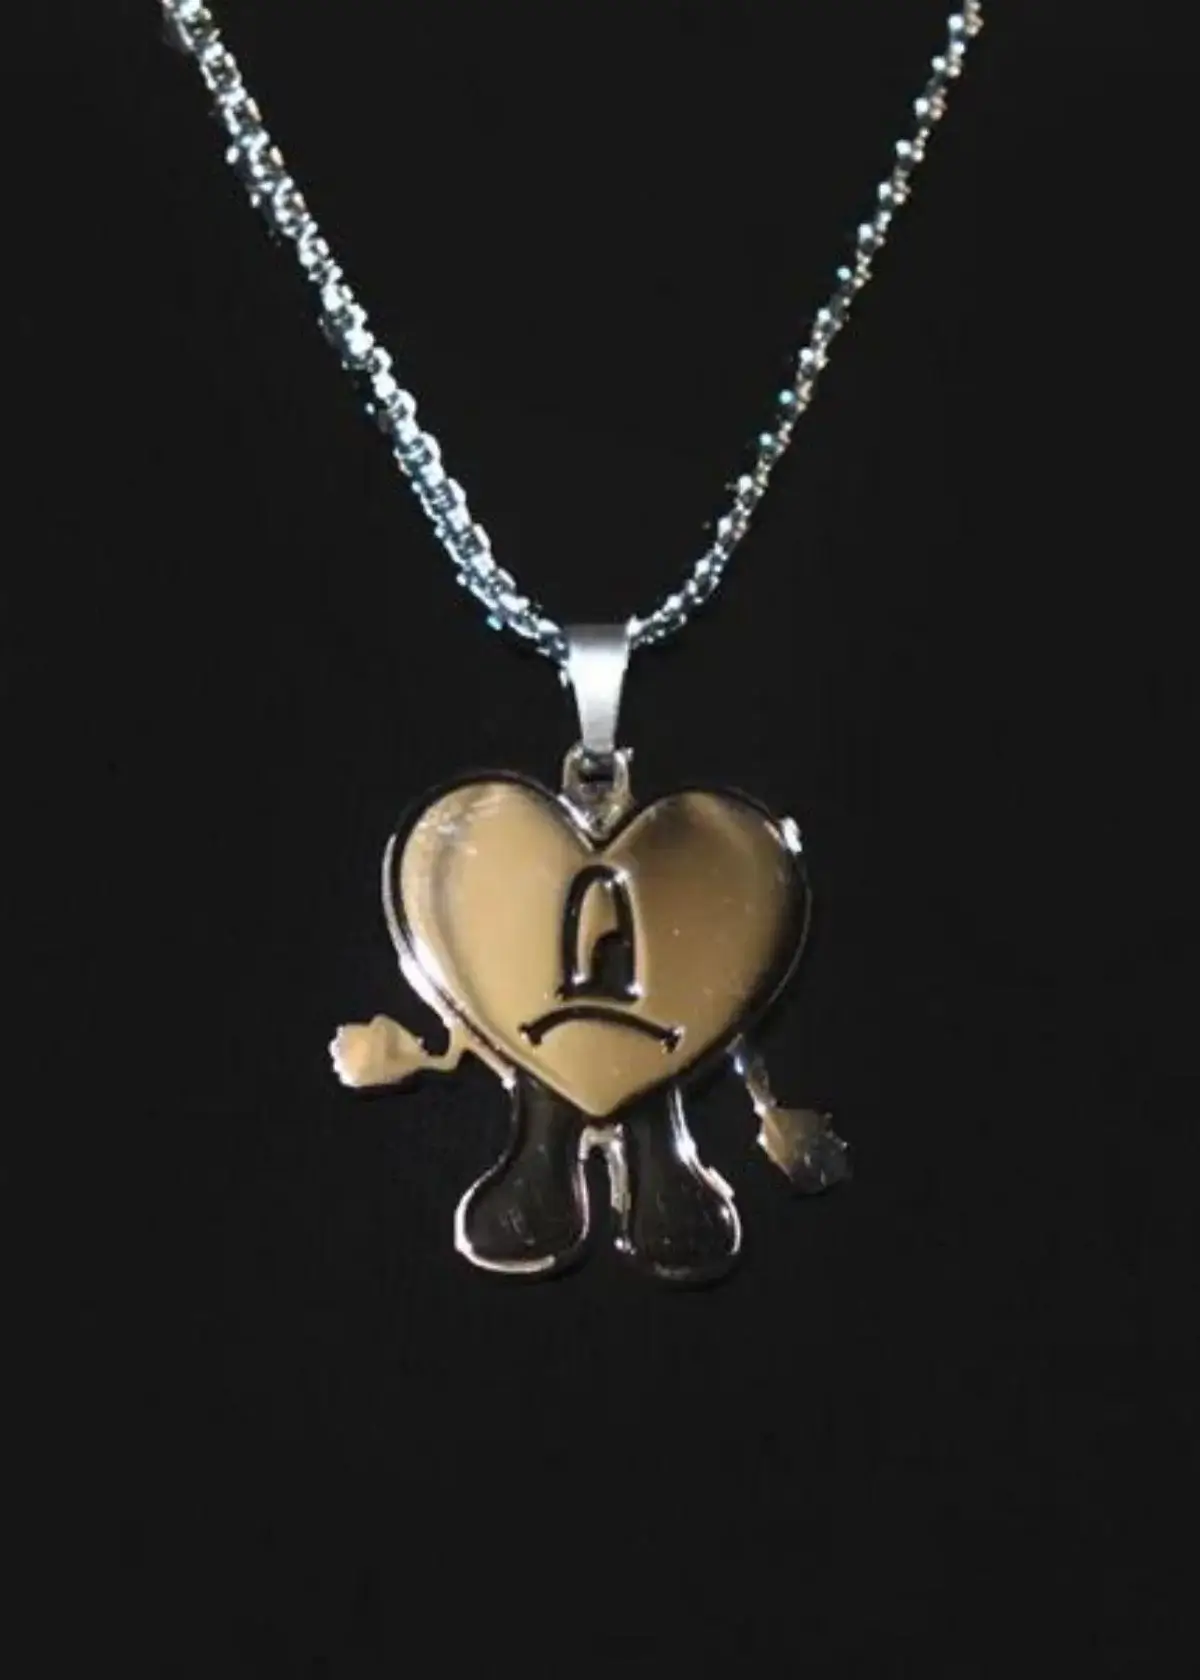 Are Bad Bunny necklaces official merchandise?